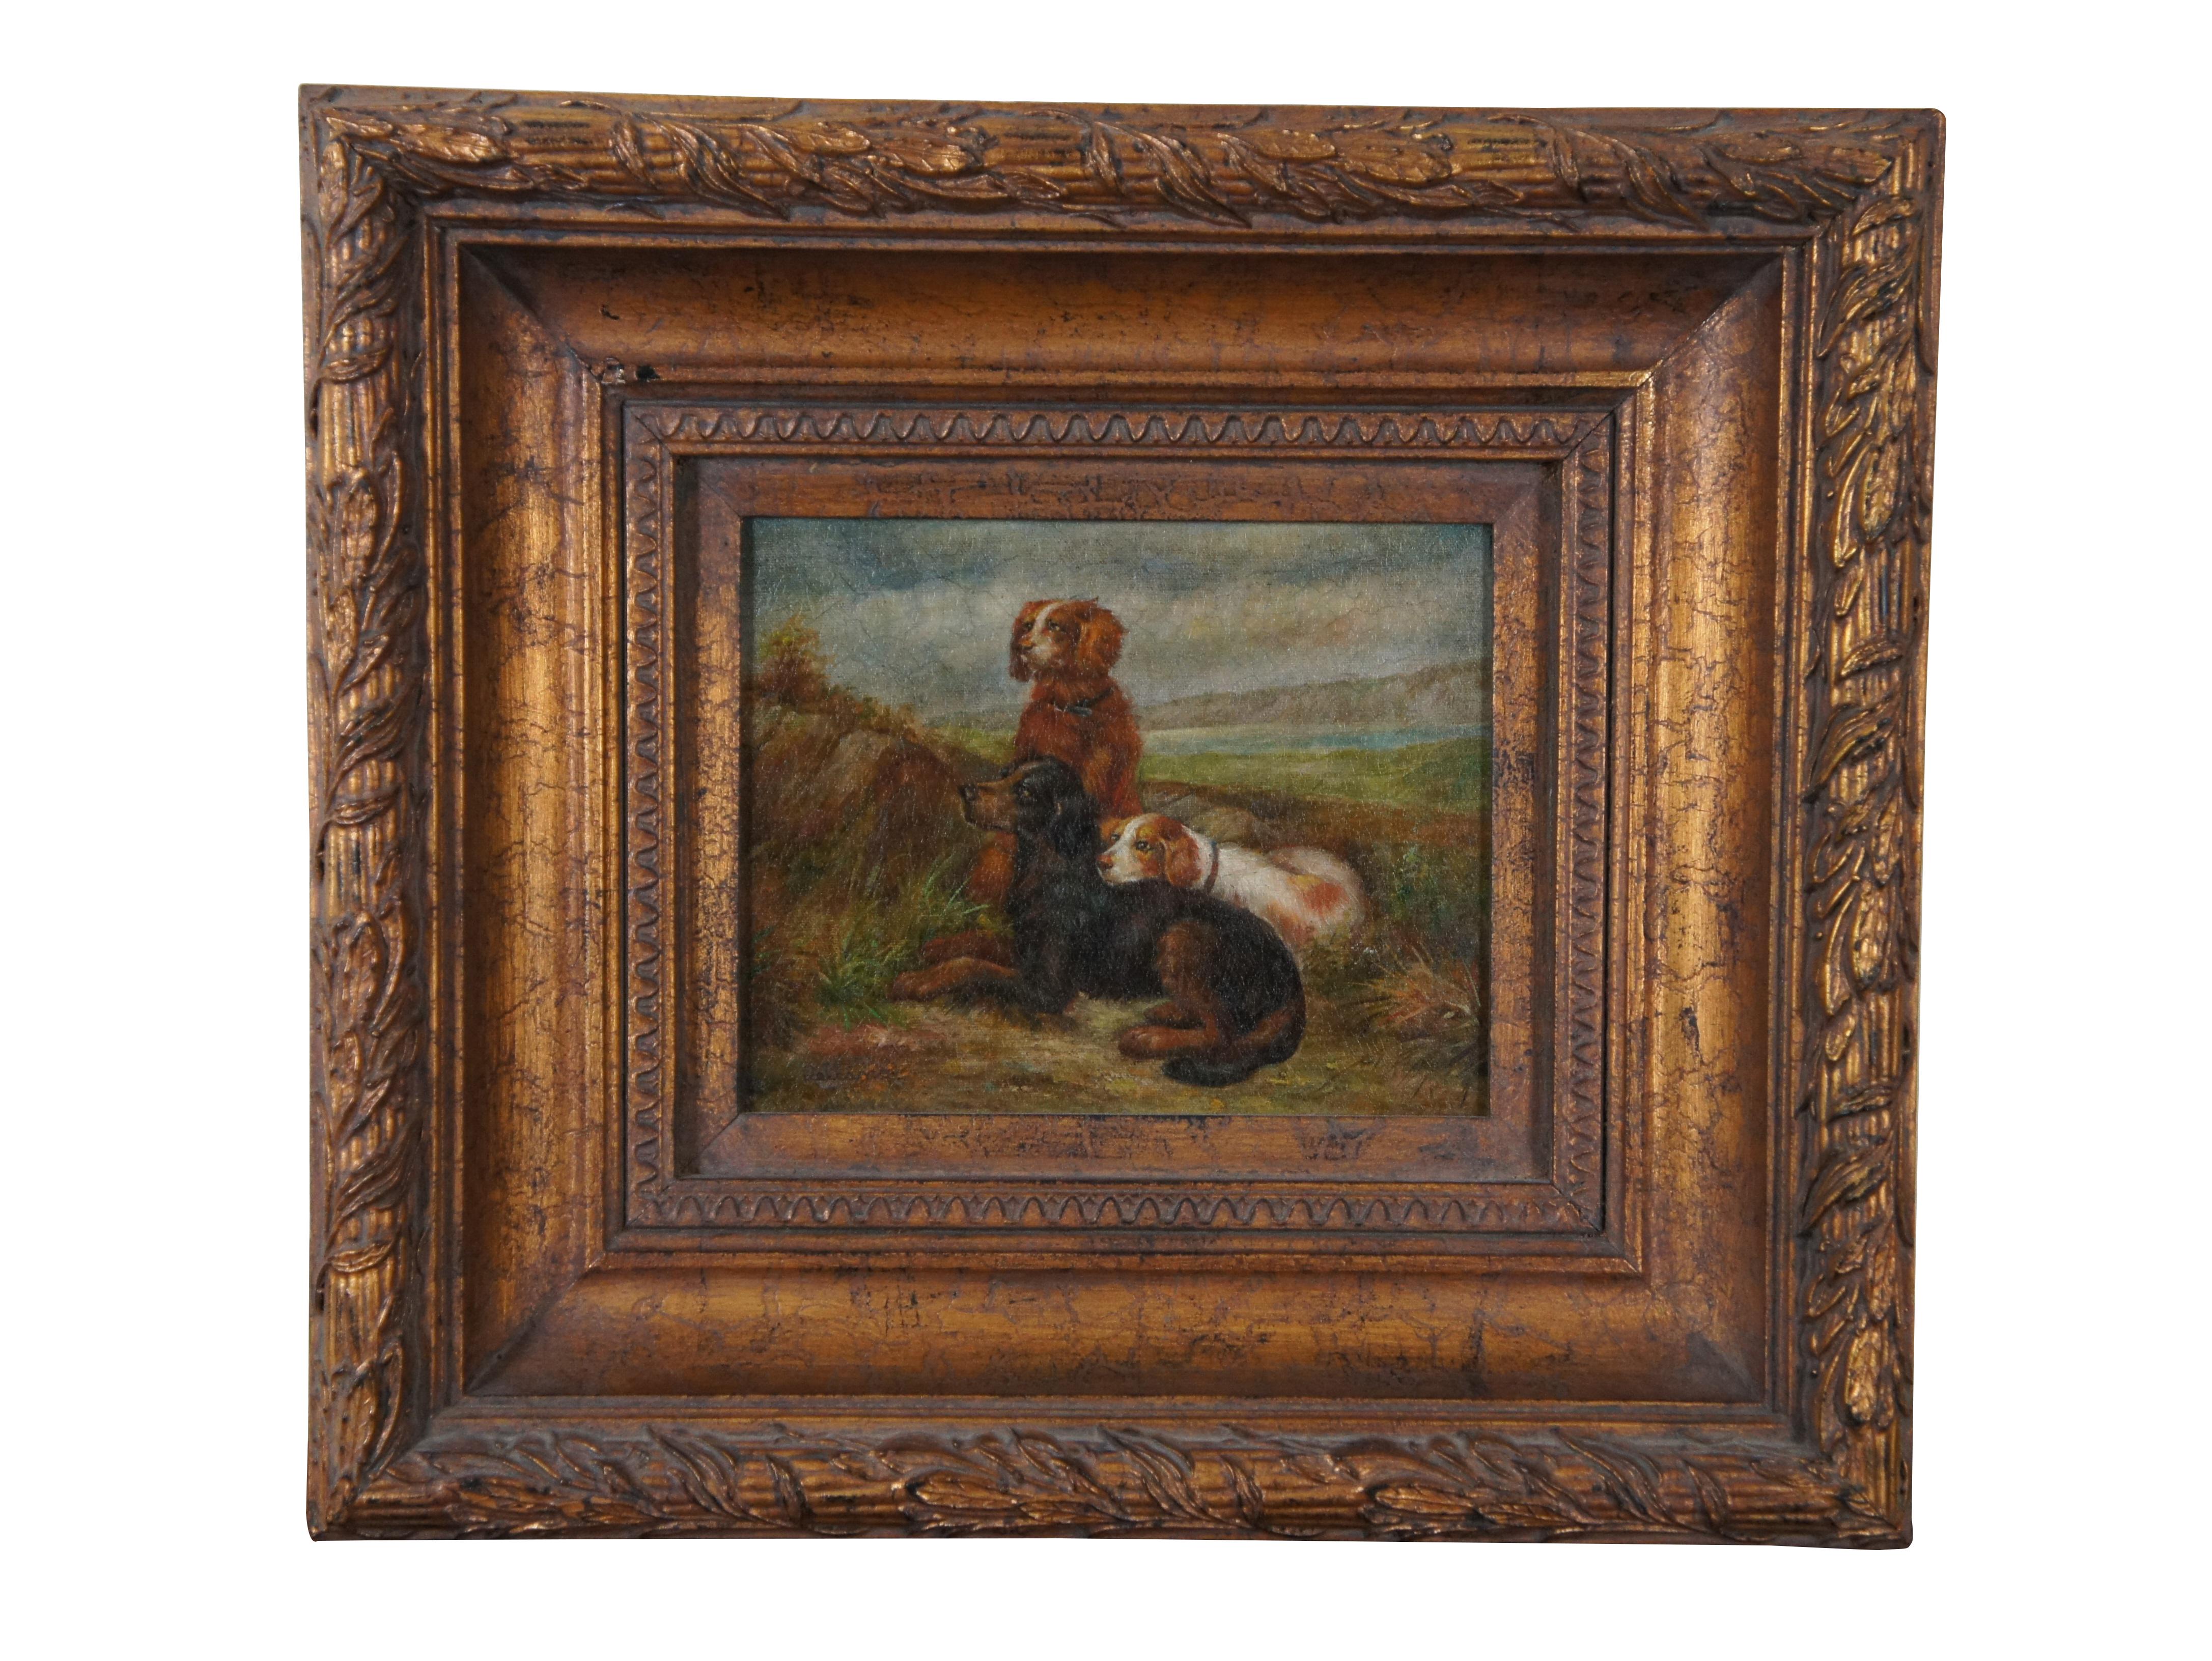 Two vintage oil on canvas paintings, each showing a trio of spaniels / British style hunting dogs in a picturesque landscape, with a crackled antiqued finish. One signed Dellano (Dellamo?) in lower left. The other signed Herman in lower right.